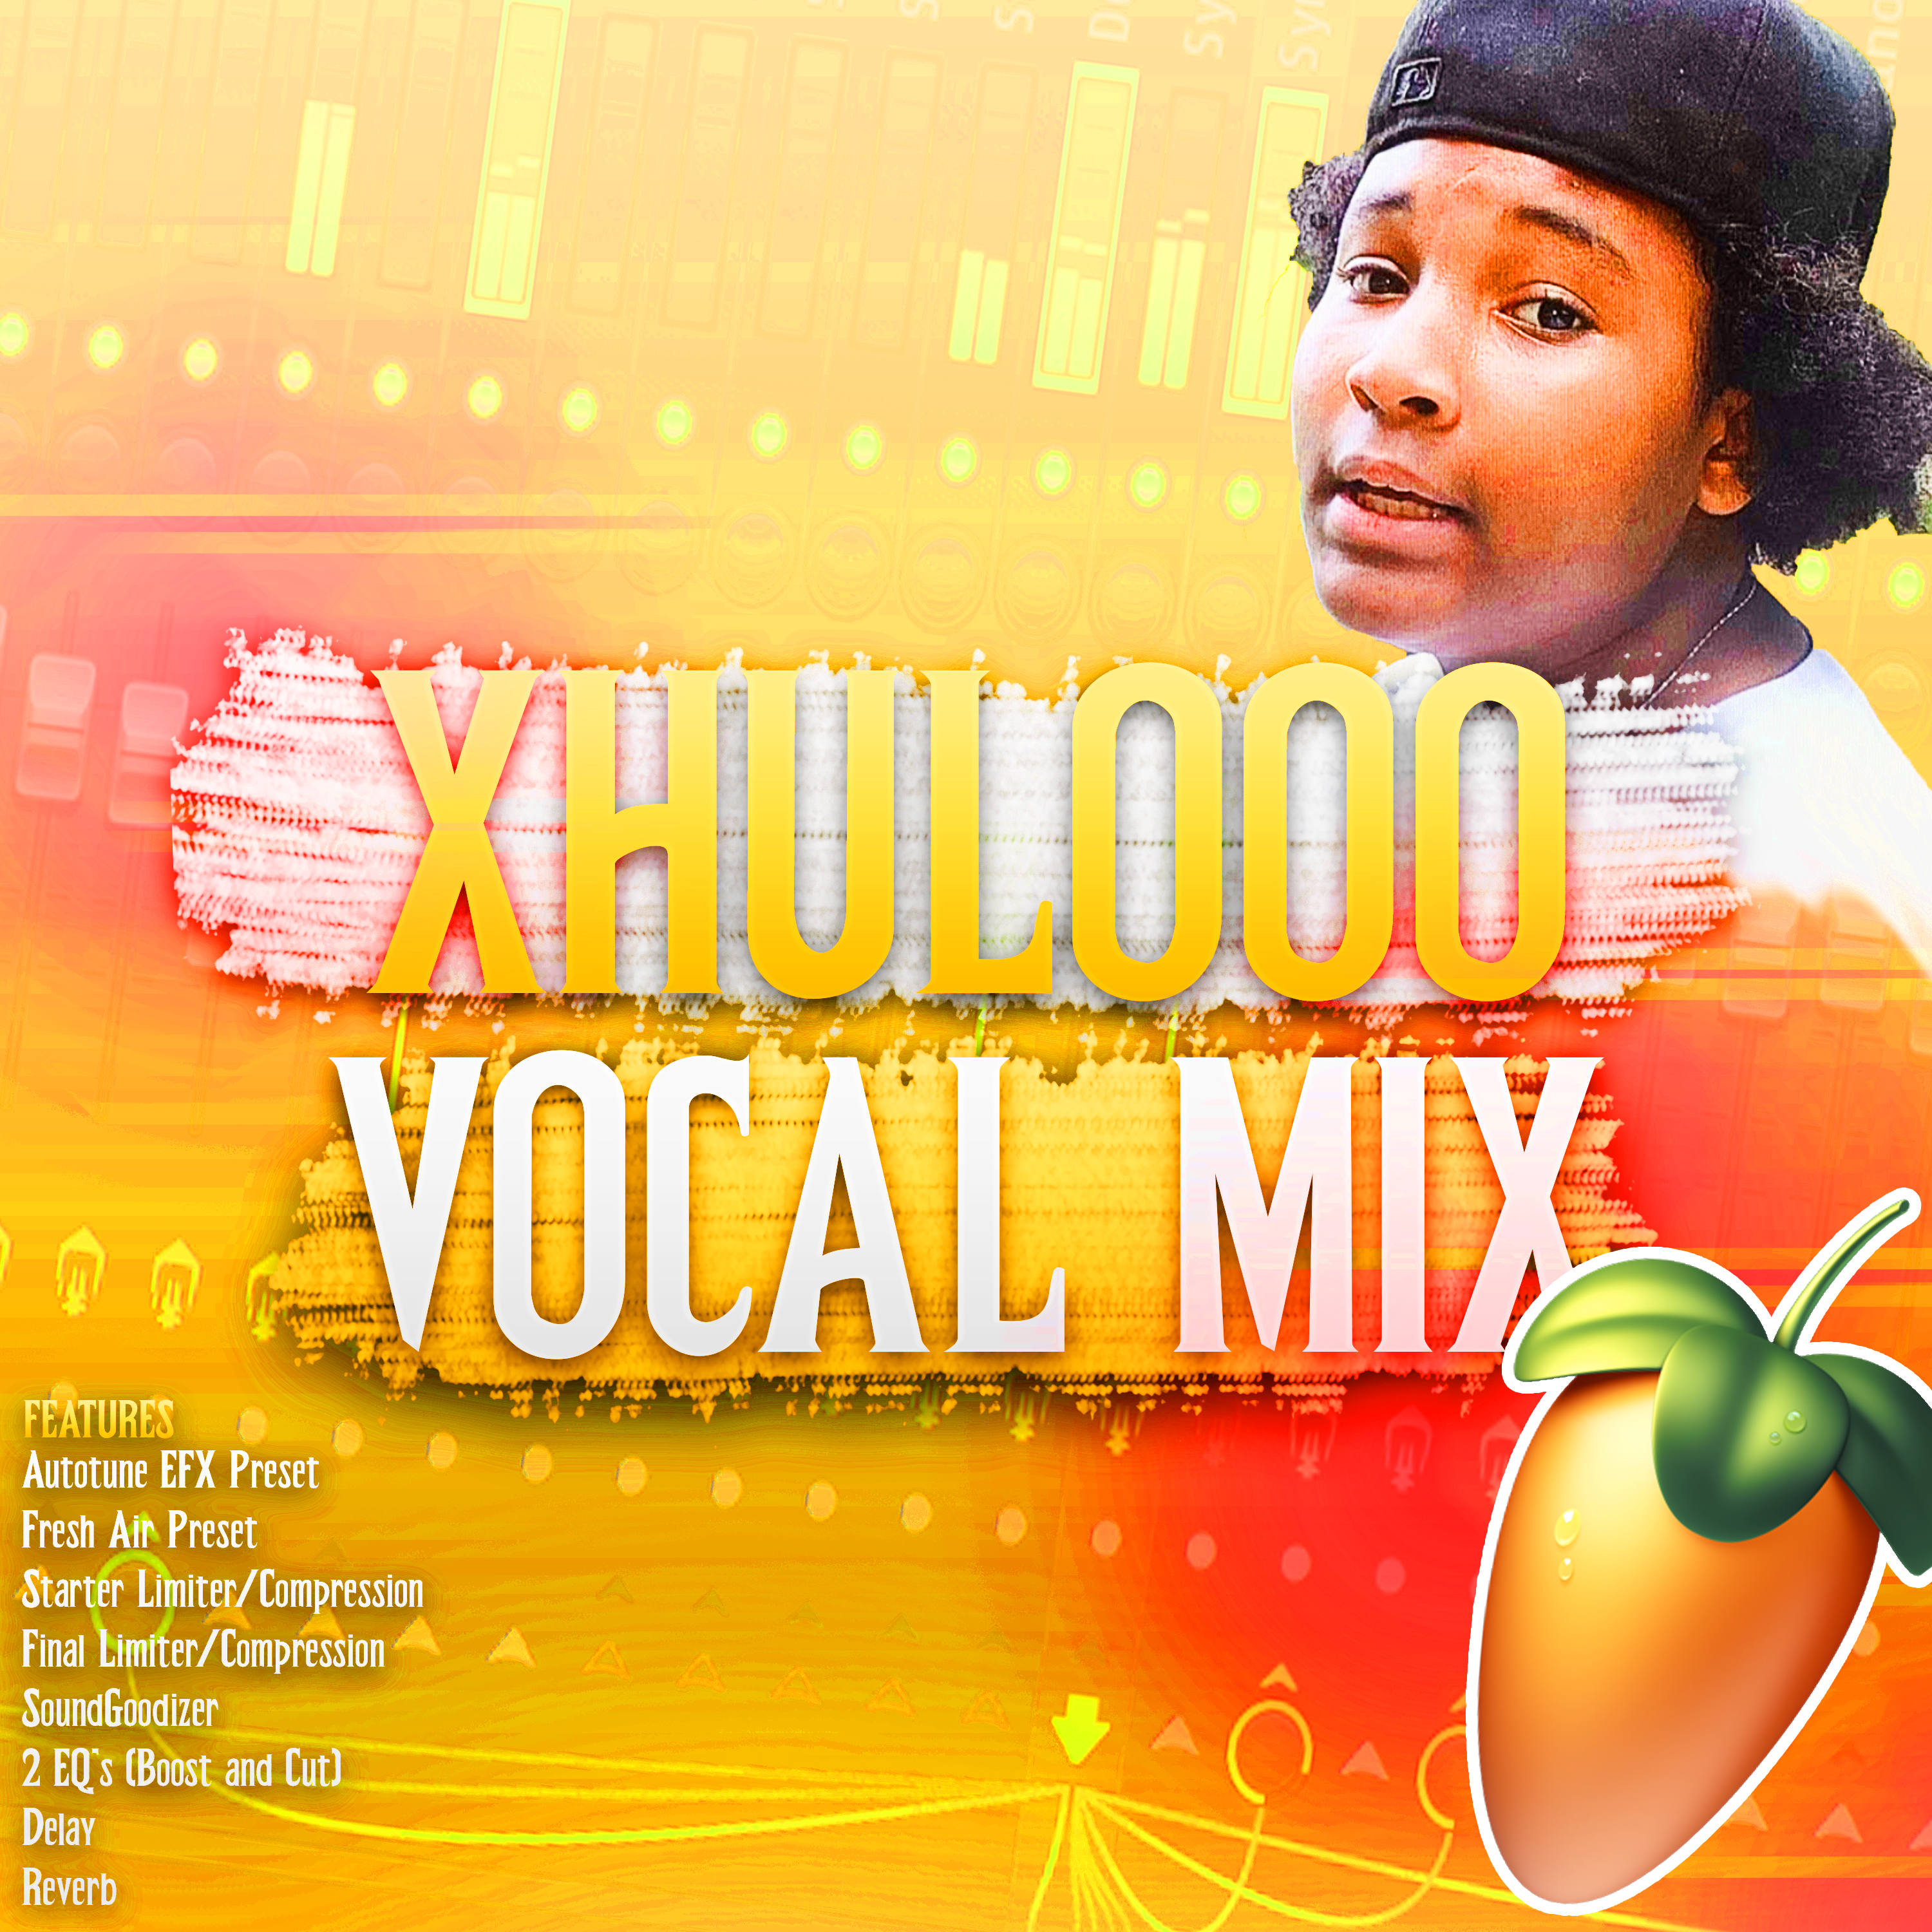 The Xhulooo OFFICIAL Vocal Preset